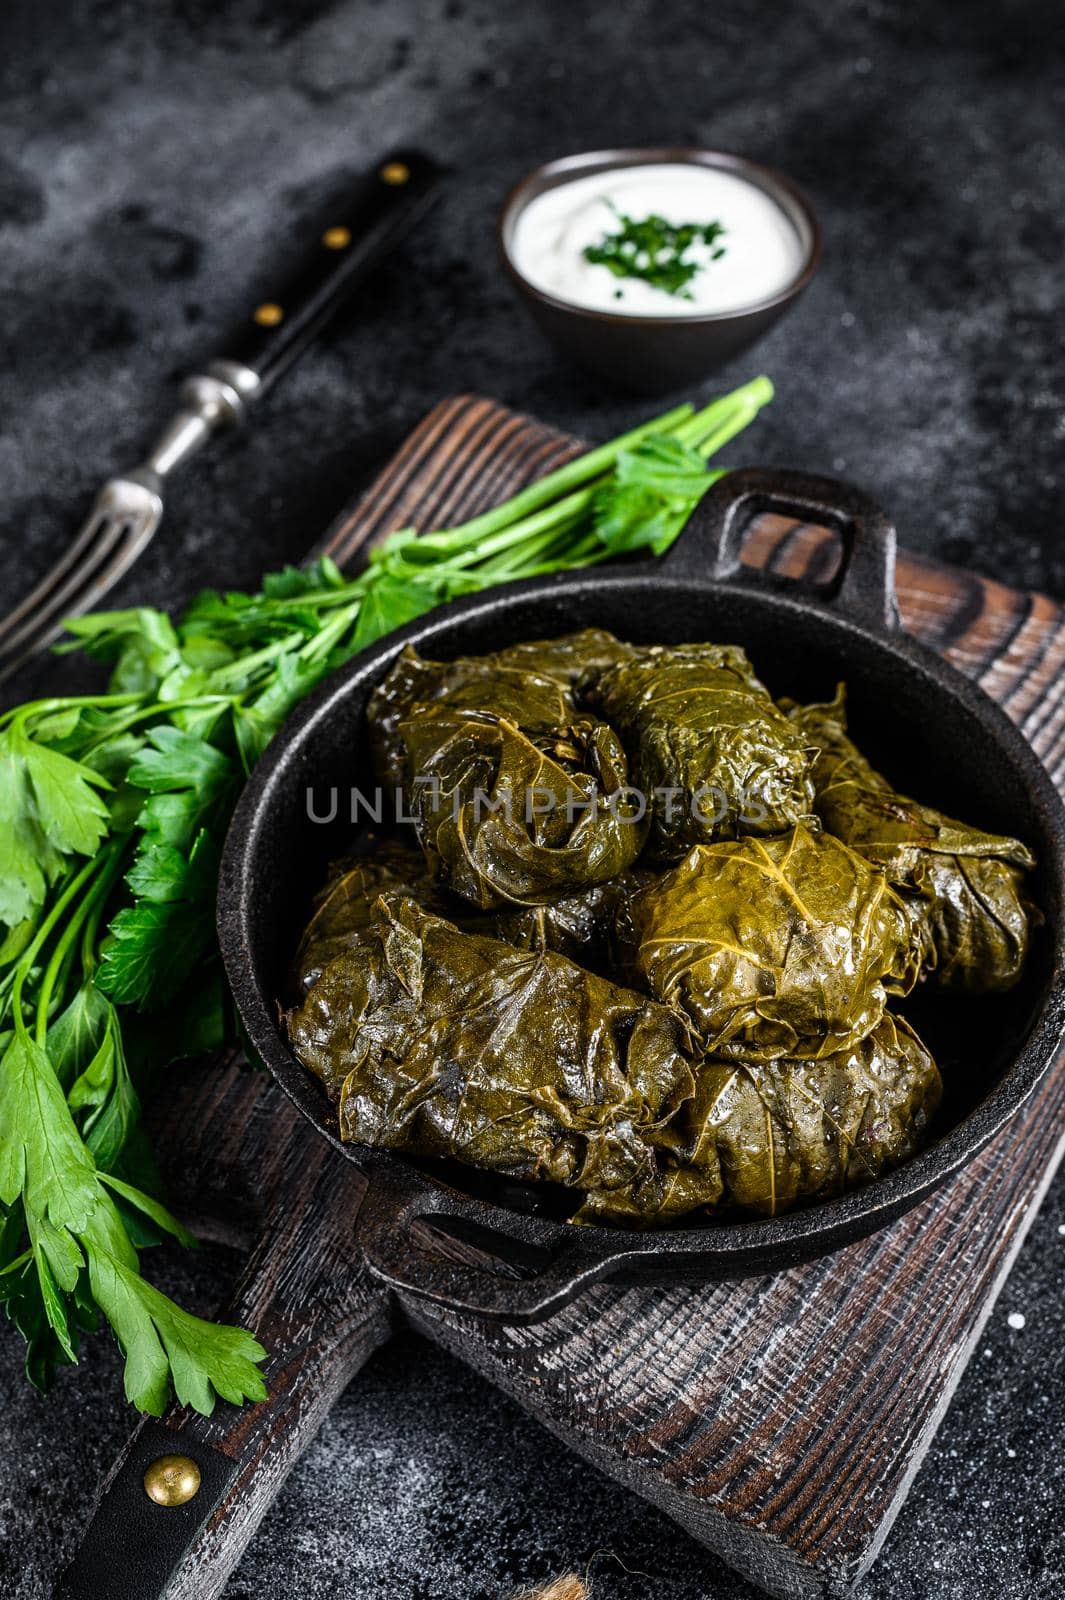 Dolma stuffed grape leaves with rice and meat. Black background. Top view by Composter